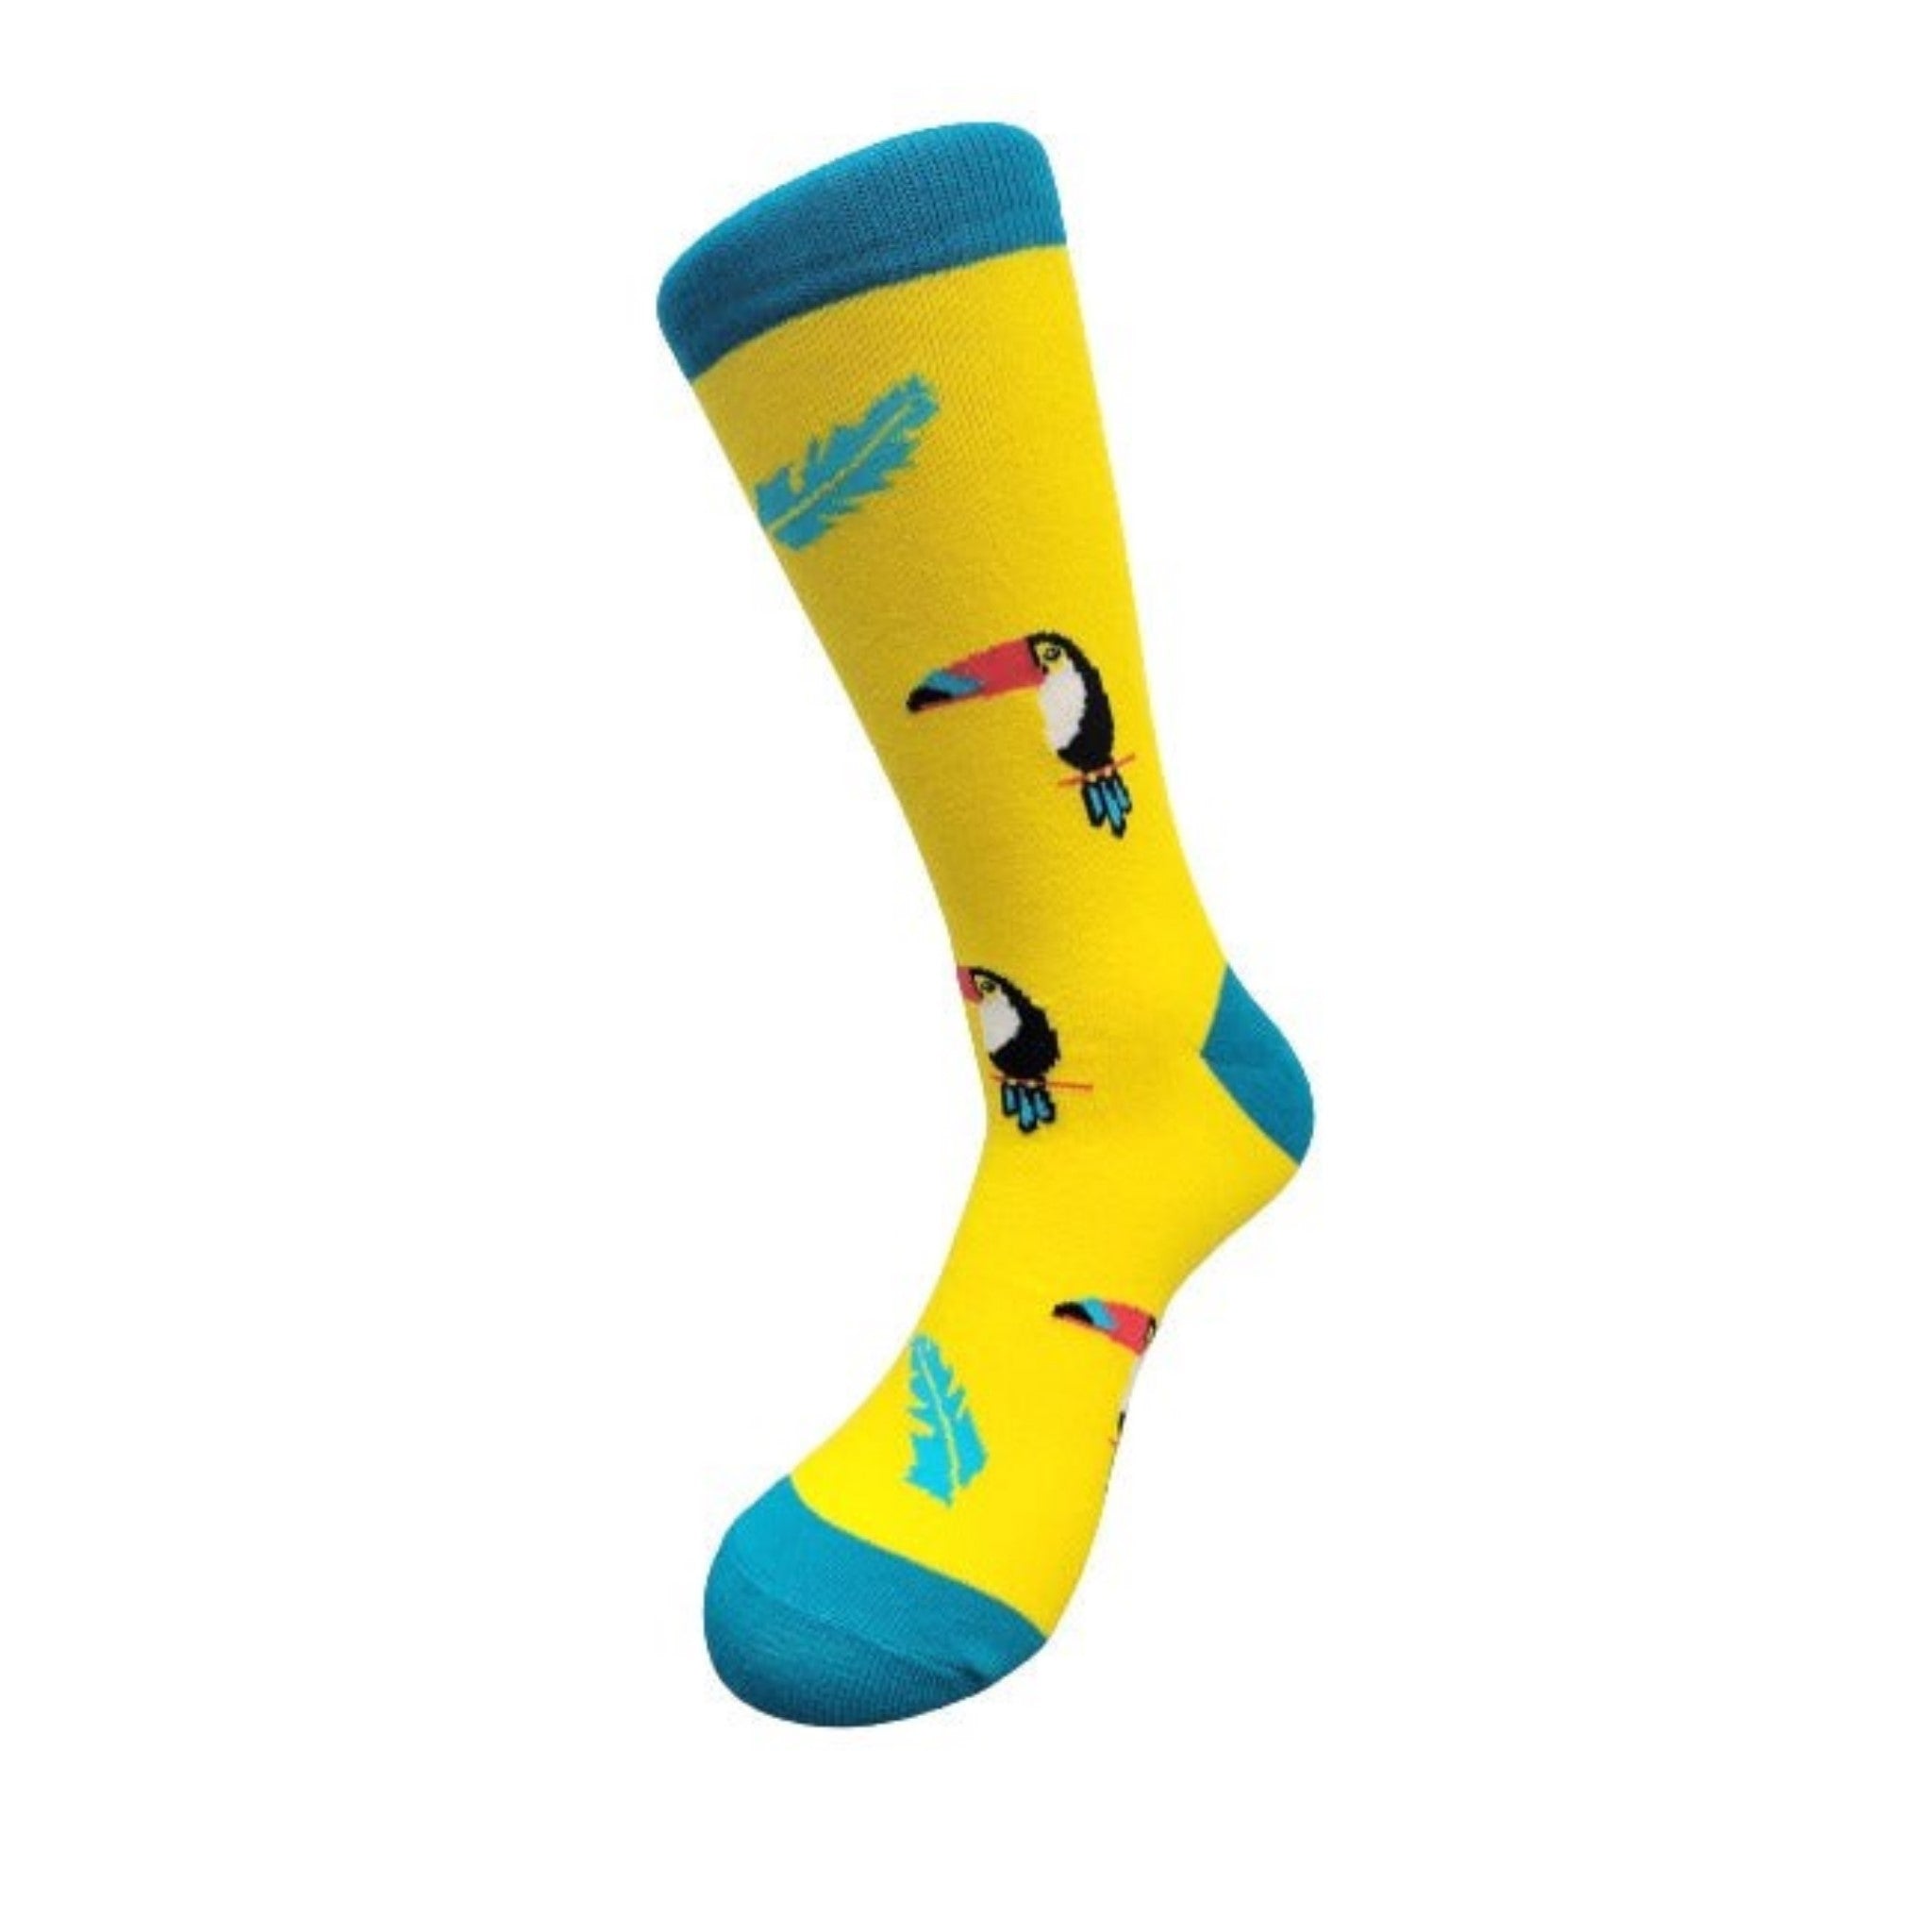 Fun Toucan on a Branch Socks from the Sock Panda (Adult Large)